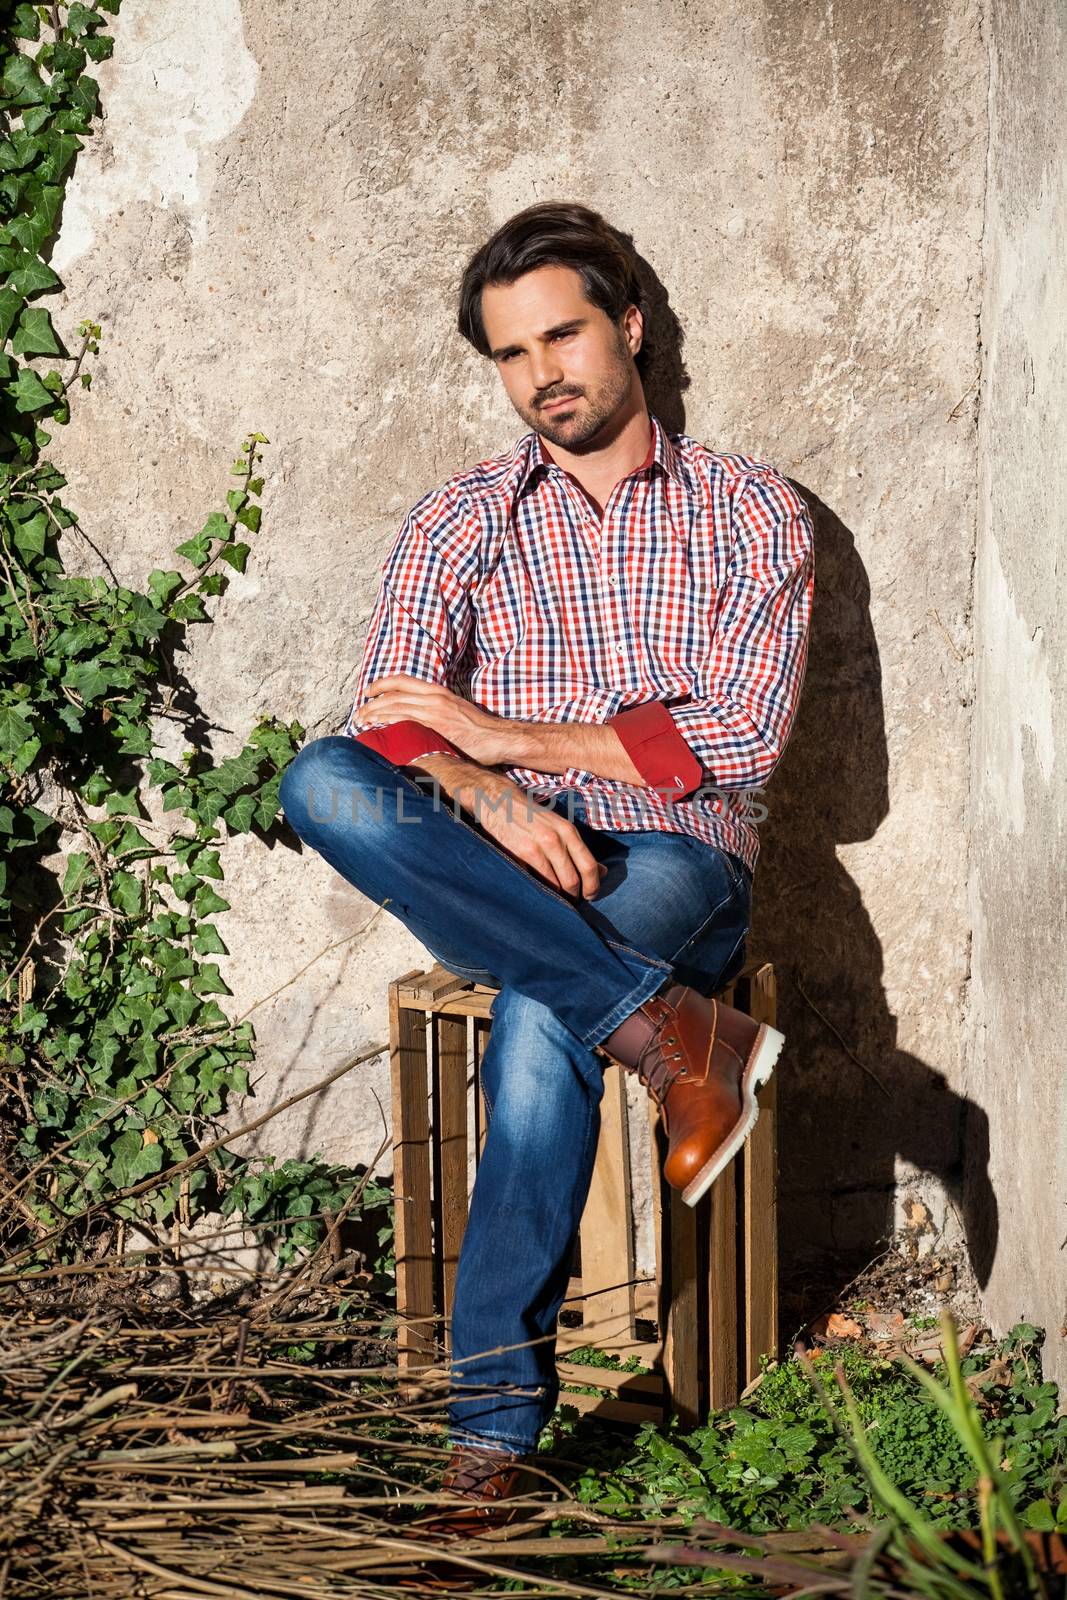 Smiling male model sitting on wooden crate with legs crossed